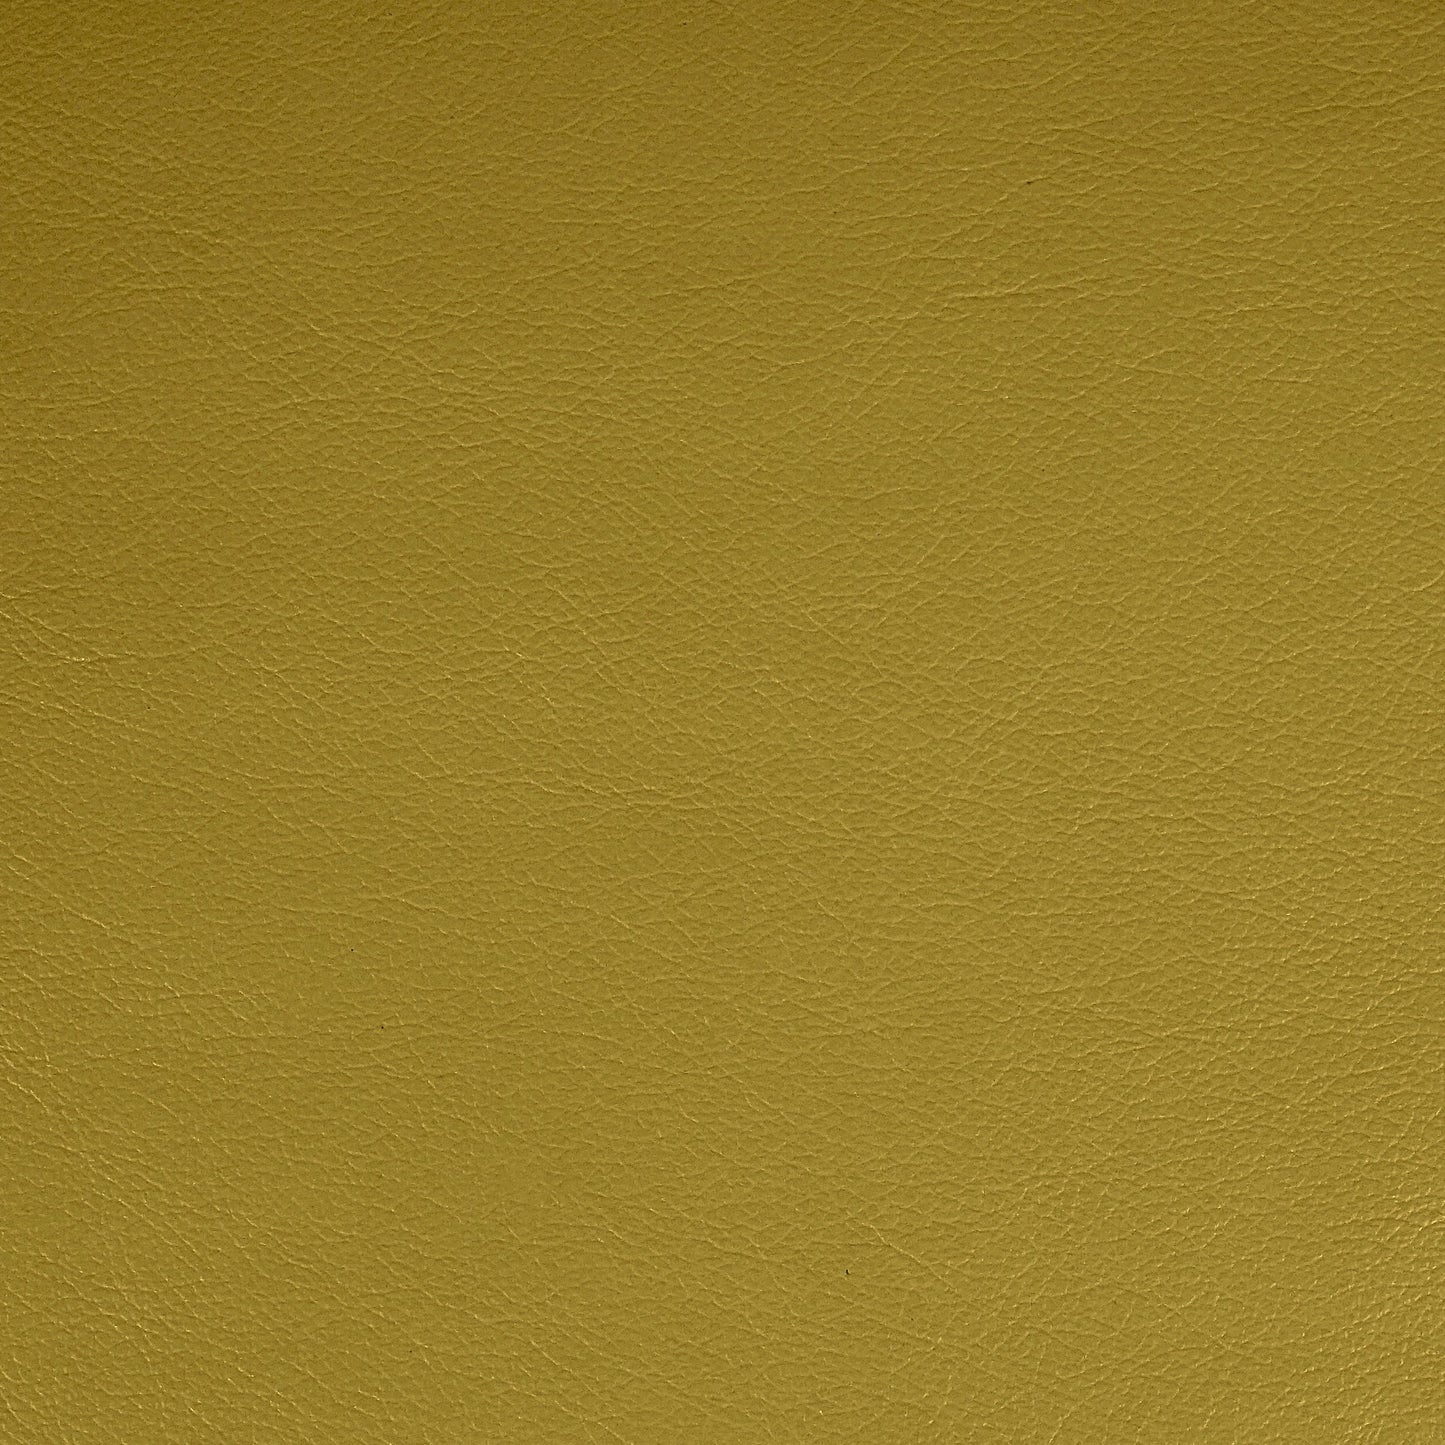 Kismet, Margarita, Iconic® Antimicrobial & Cleanable, Hospitality Leather Hide